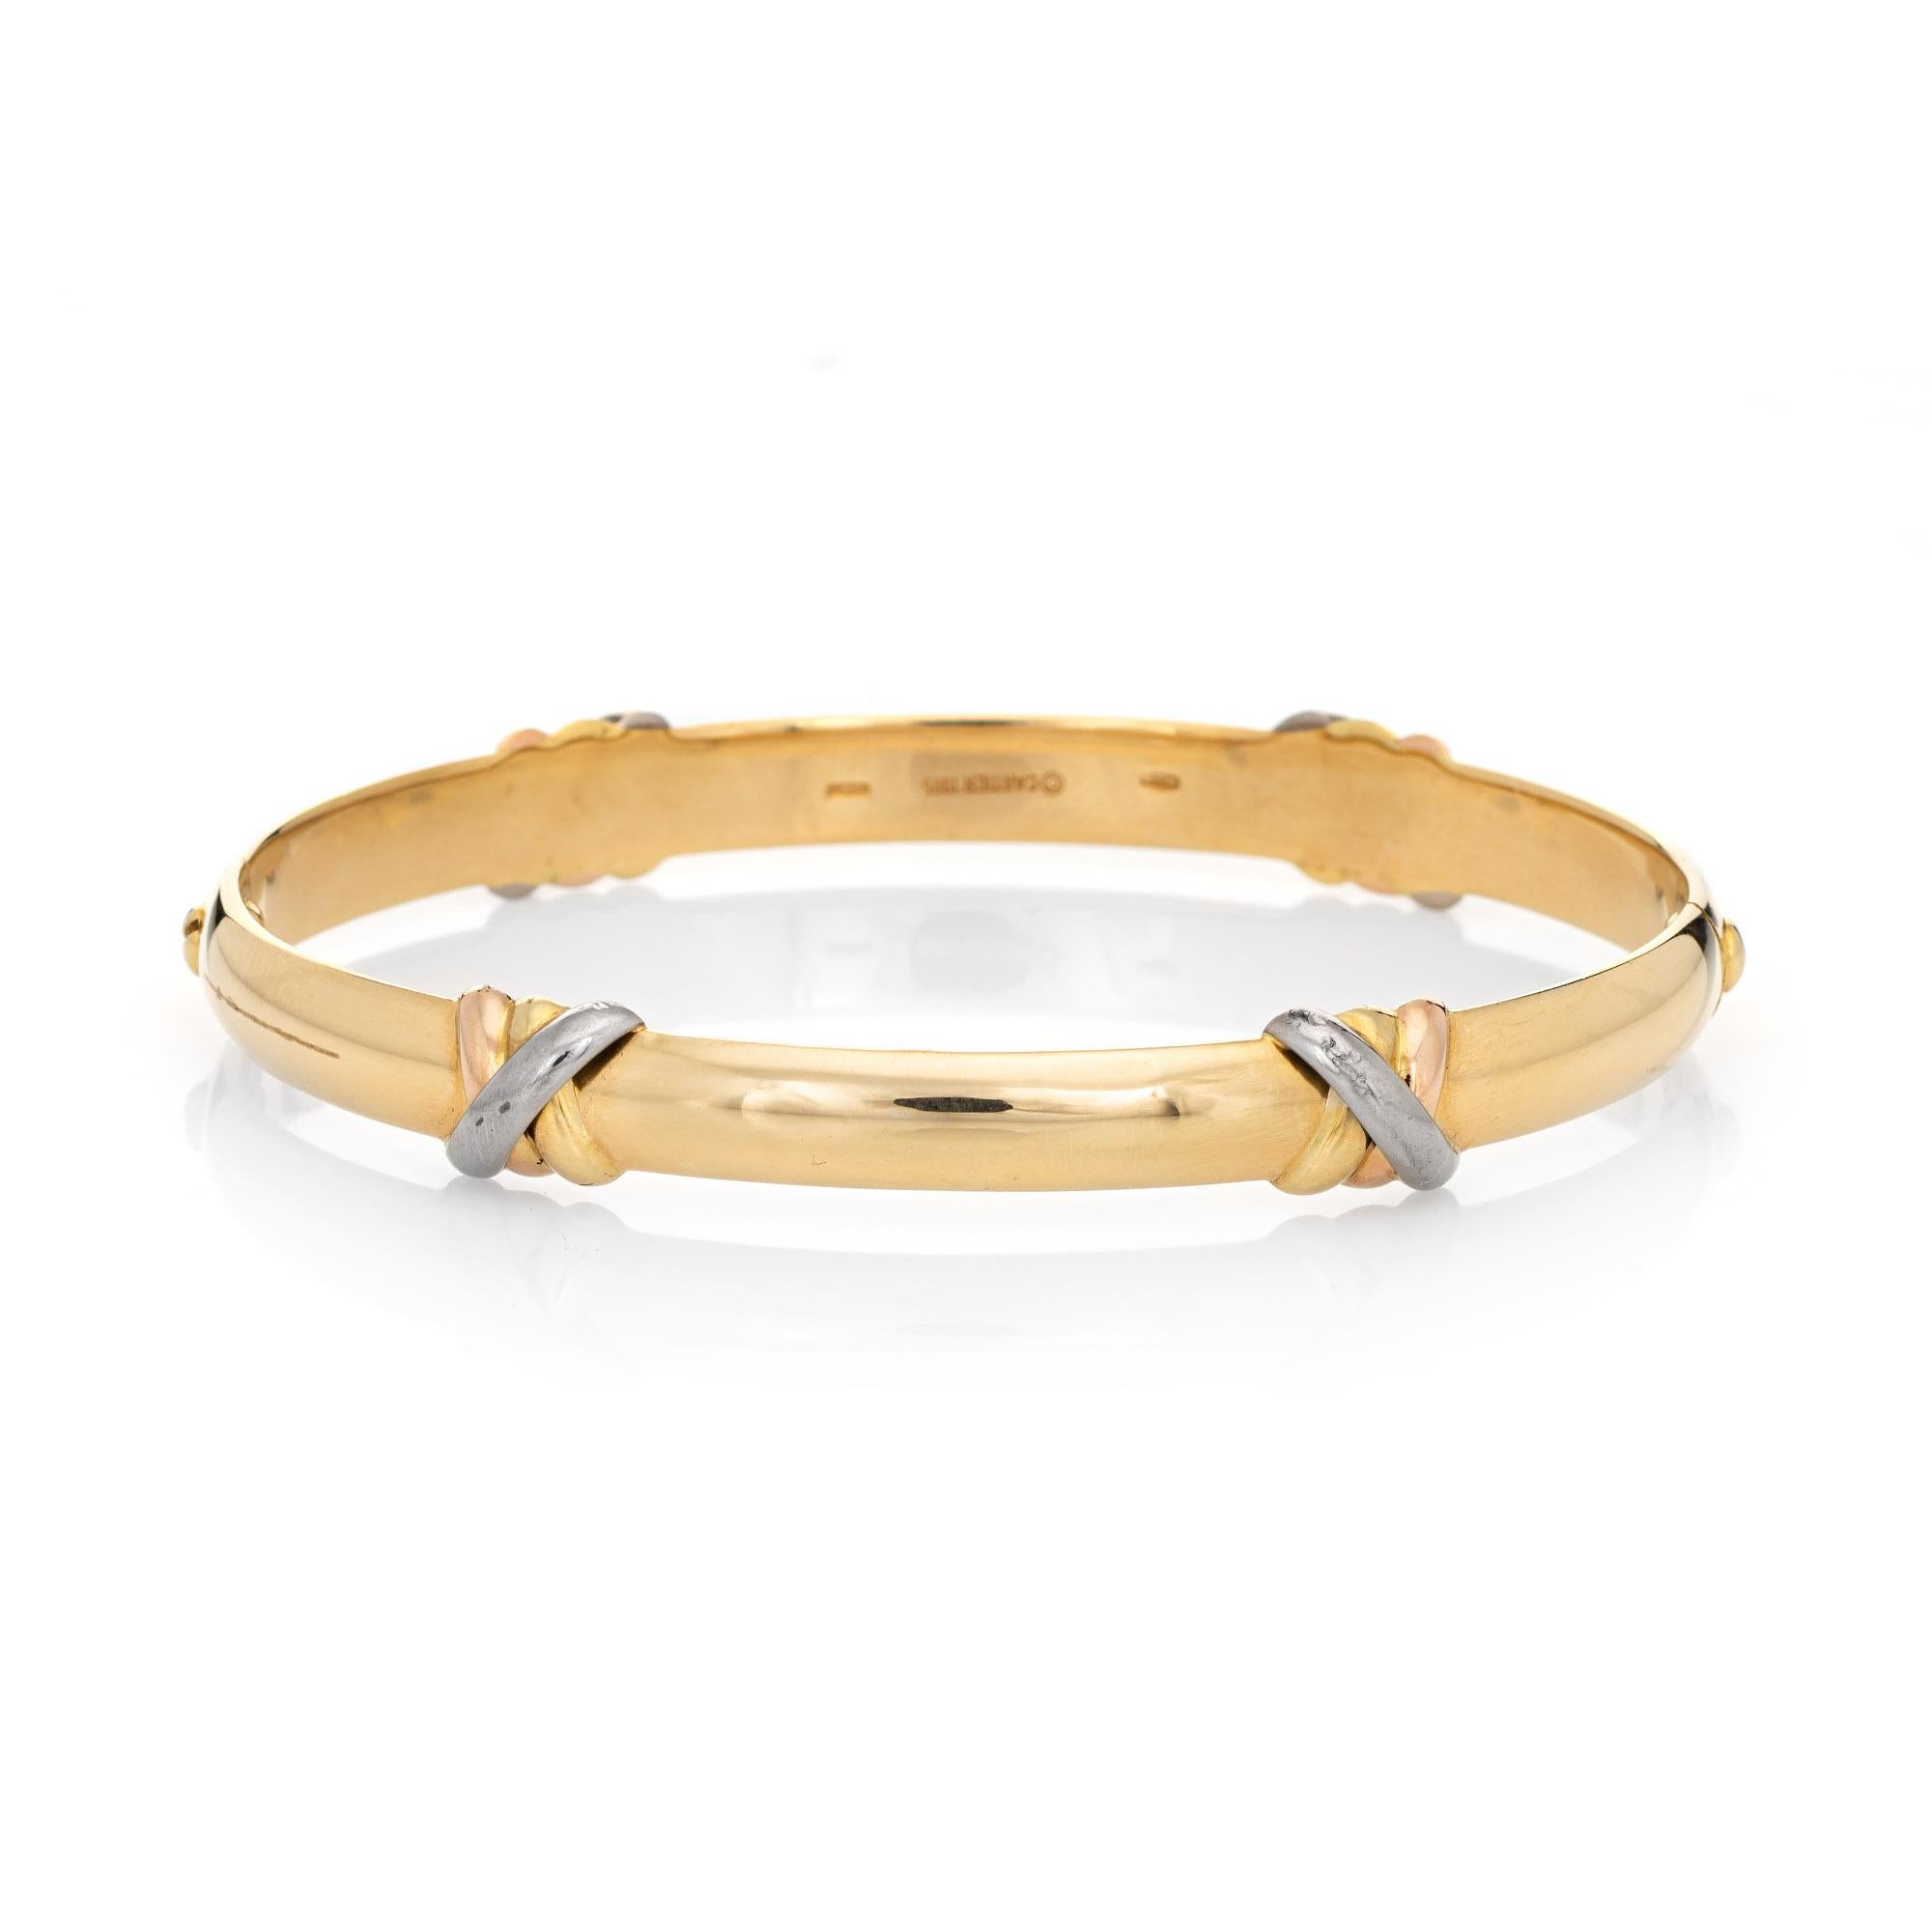 Vintage Cartier Trinity bangle bracelet crafted in 18 karat yellow gold (with a rose, white and yellow gold trinity designed stations).  

The Trinity bracelet was released in 1995 and is no longer available for sale at Cartier. A classic bracelet